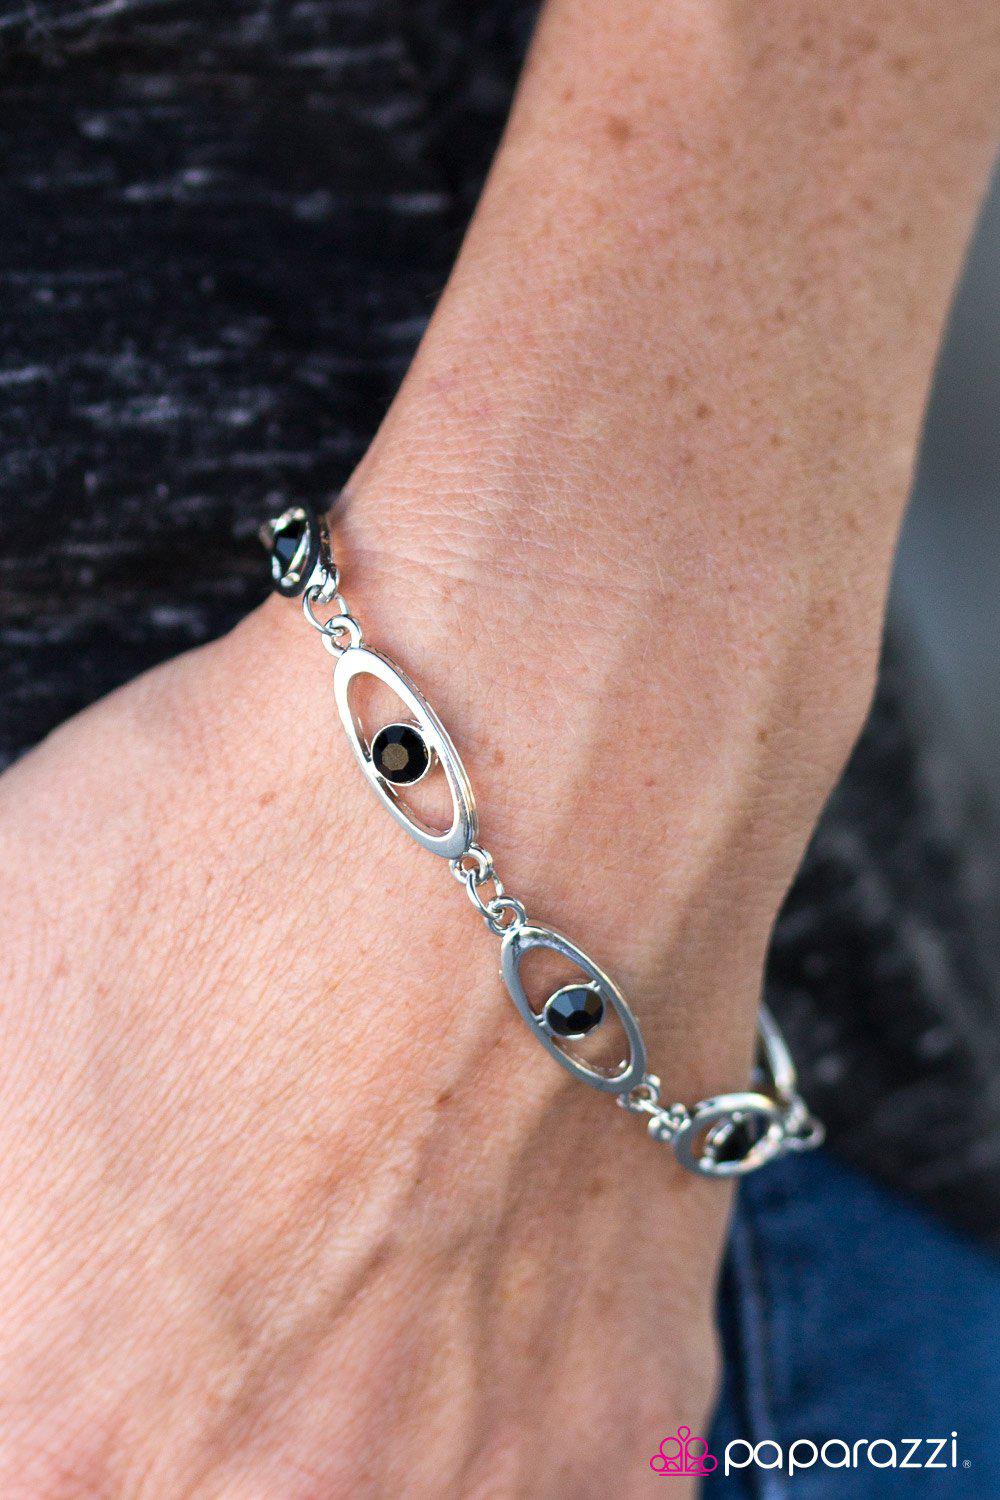 Starry Eyed Silver and Black Bracelet - Paparazzi Accessories-CarasShop.com - $5 Jewelry by Cara Jewels